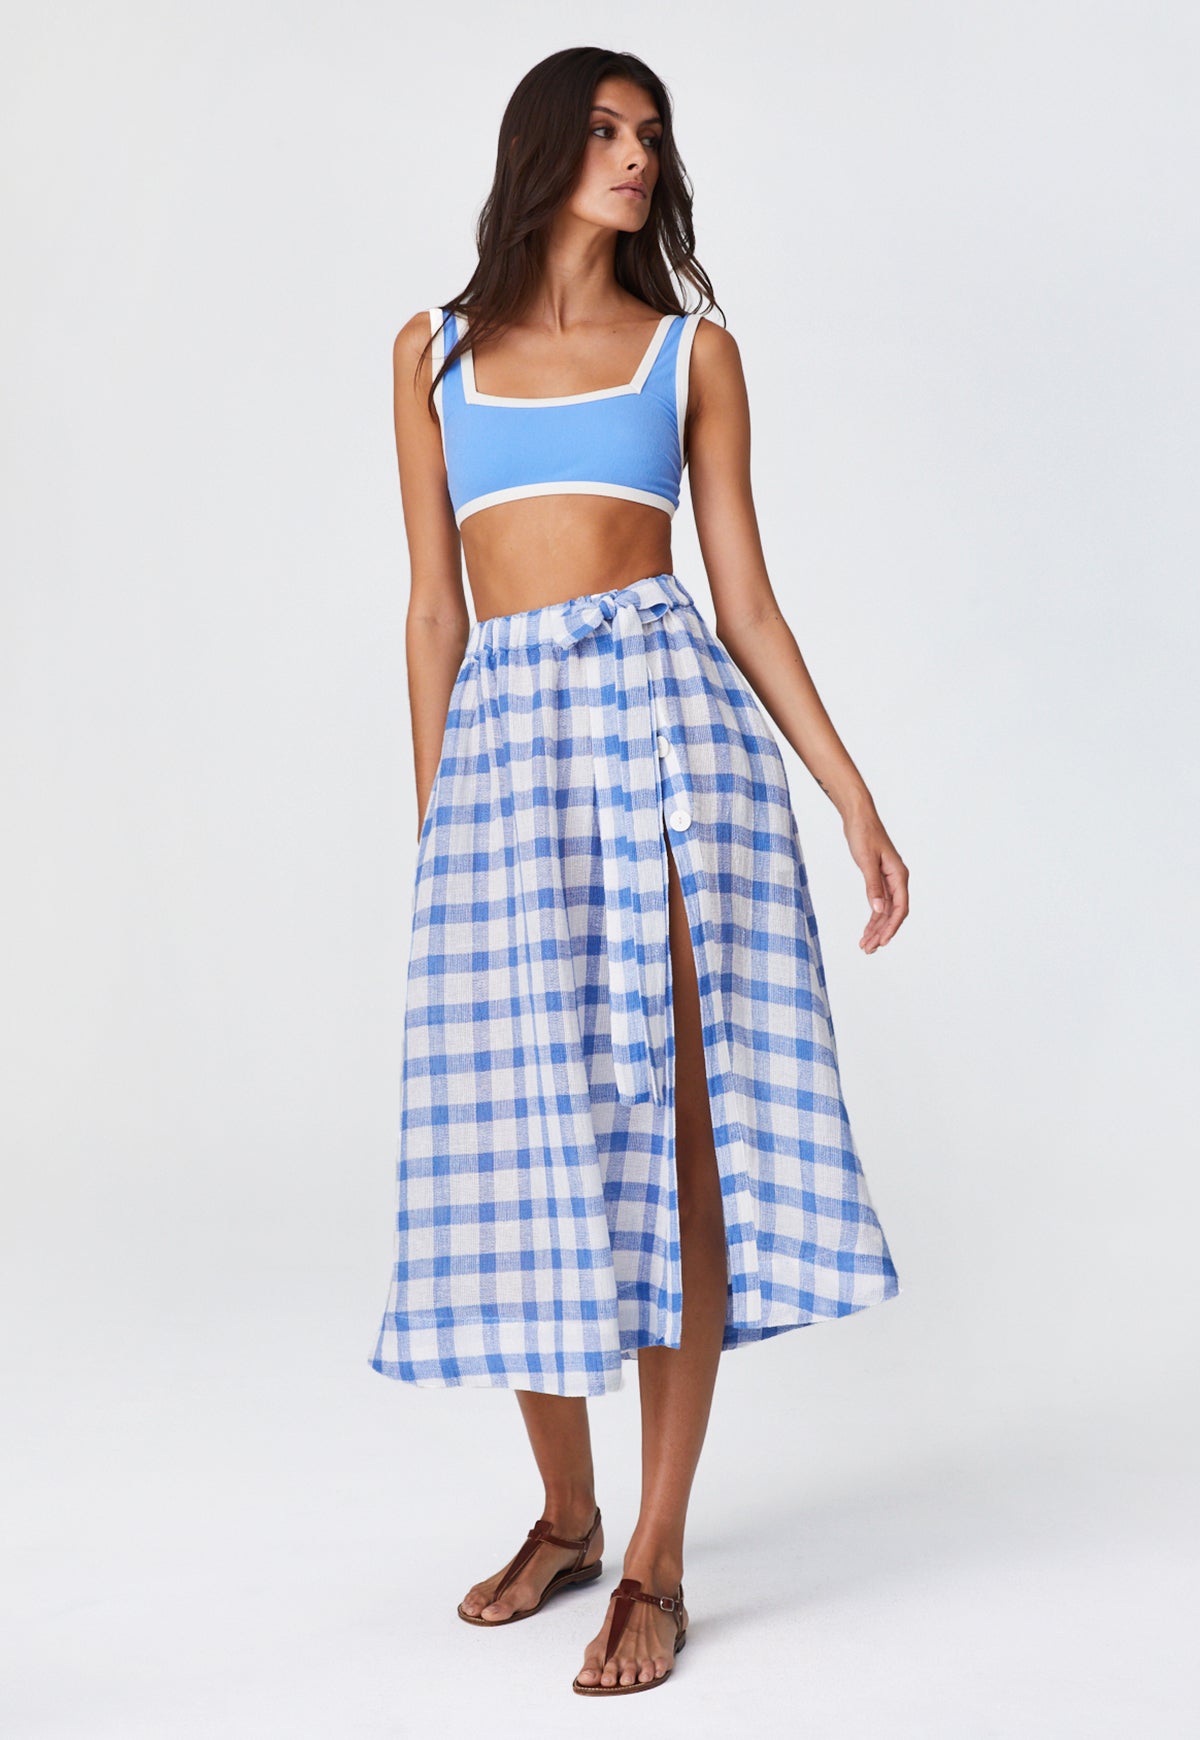 THE FULL CIRCLE SKIRT in AZURE GINGHAM CHIOS GAUZE